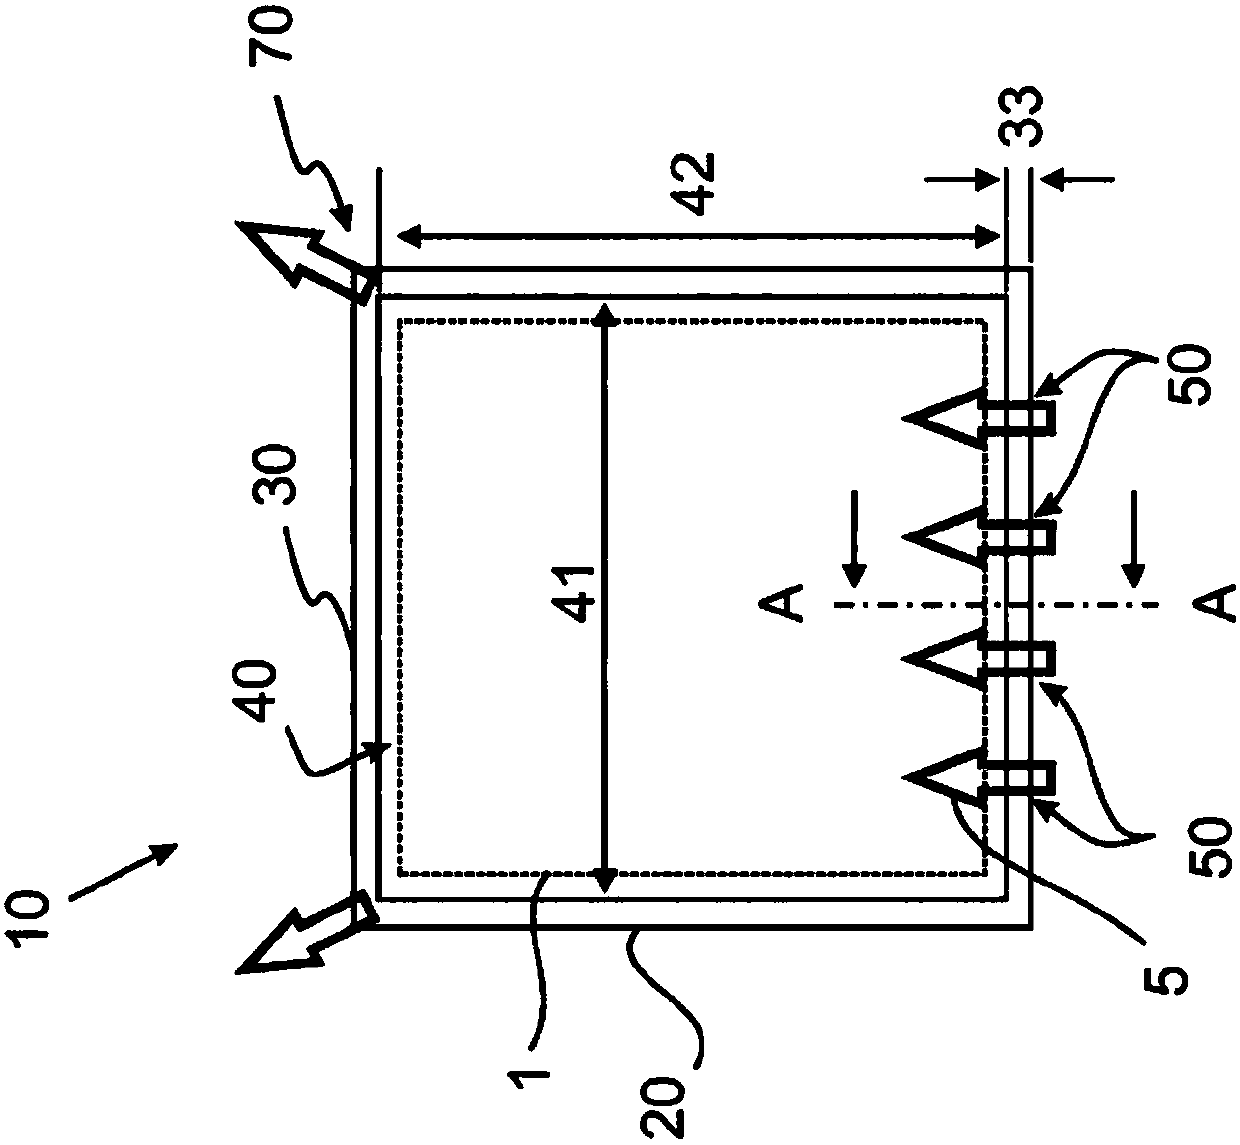 Housing arrangement for at least one battery cell